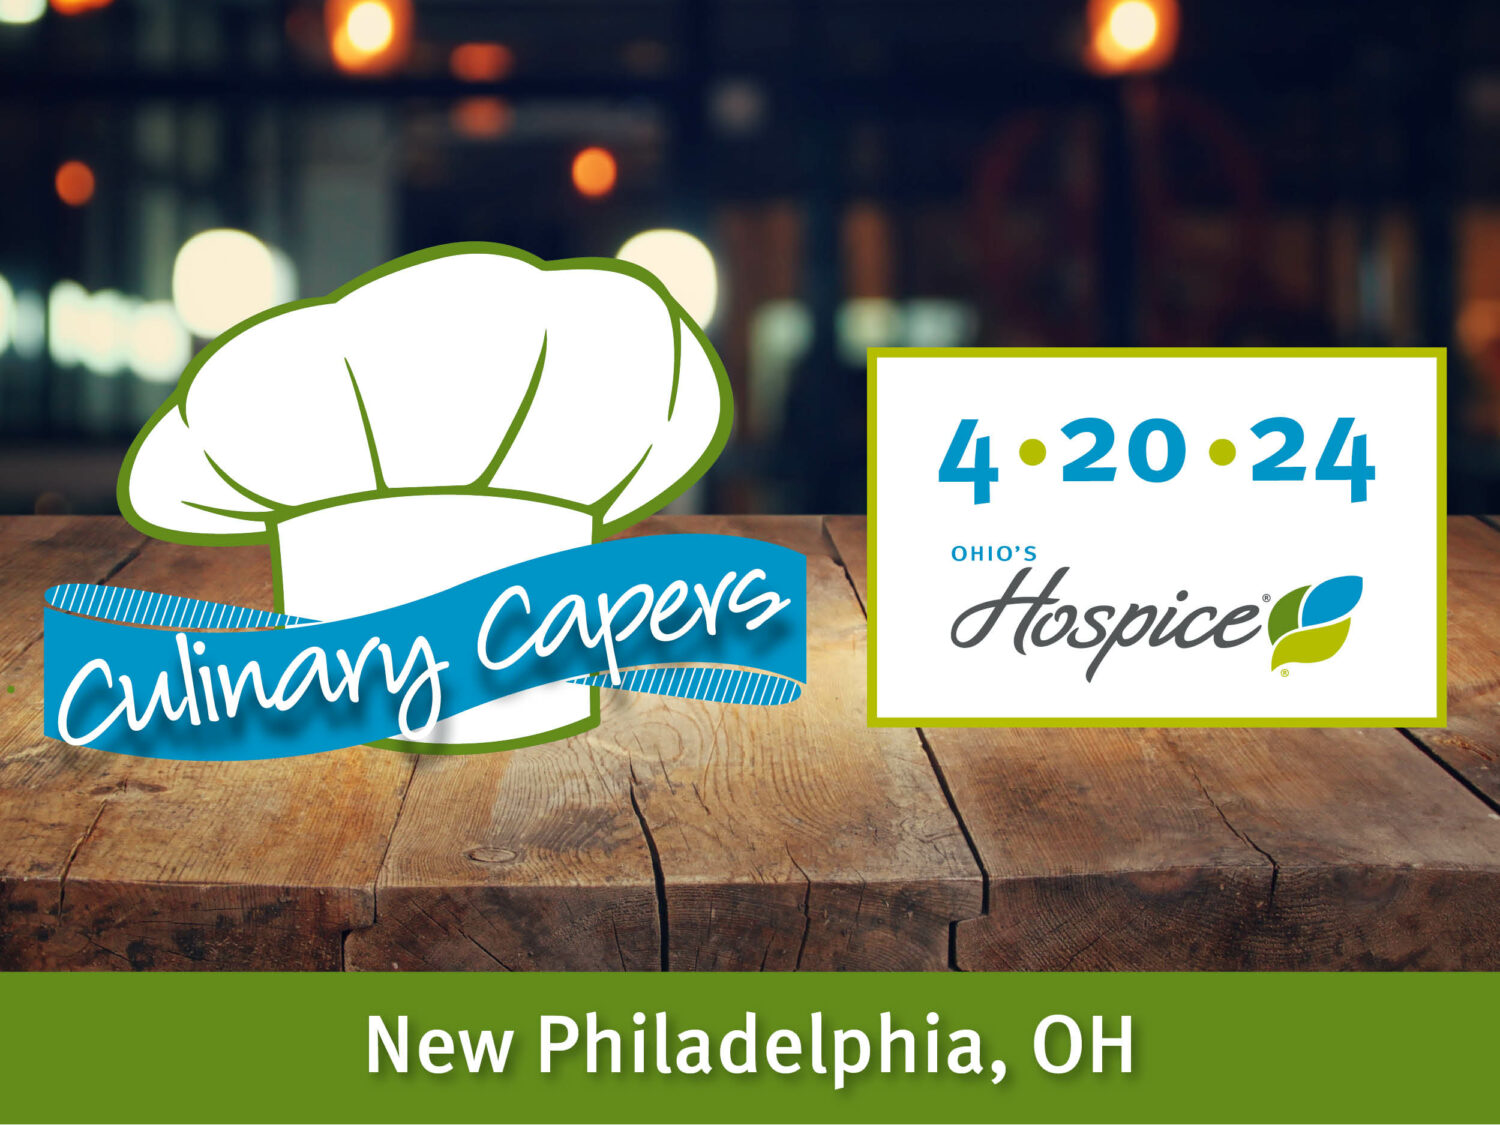 Culinary Capers 4.20.24 New Philadelphia, OH